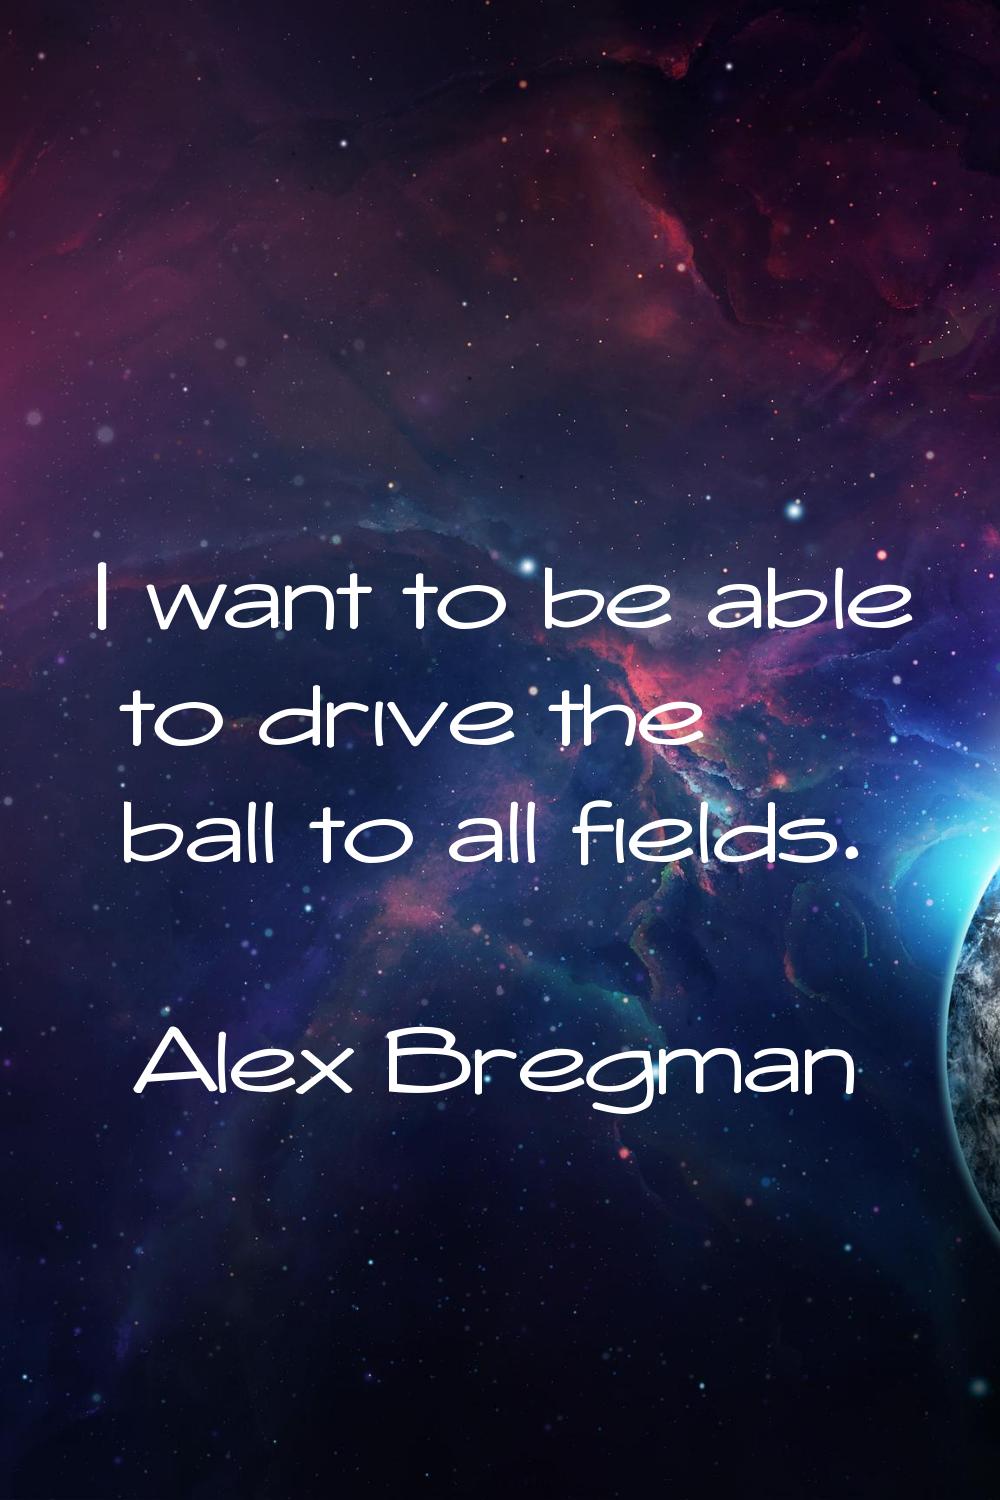 I want to be able to drive the ball to all fields.